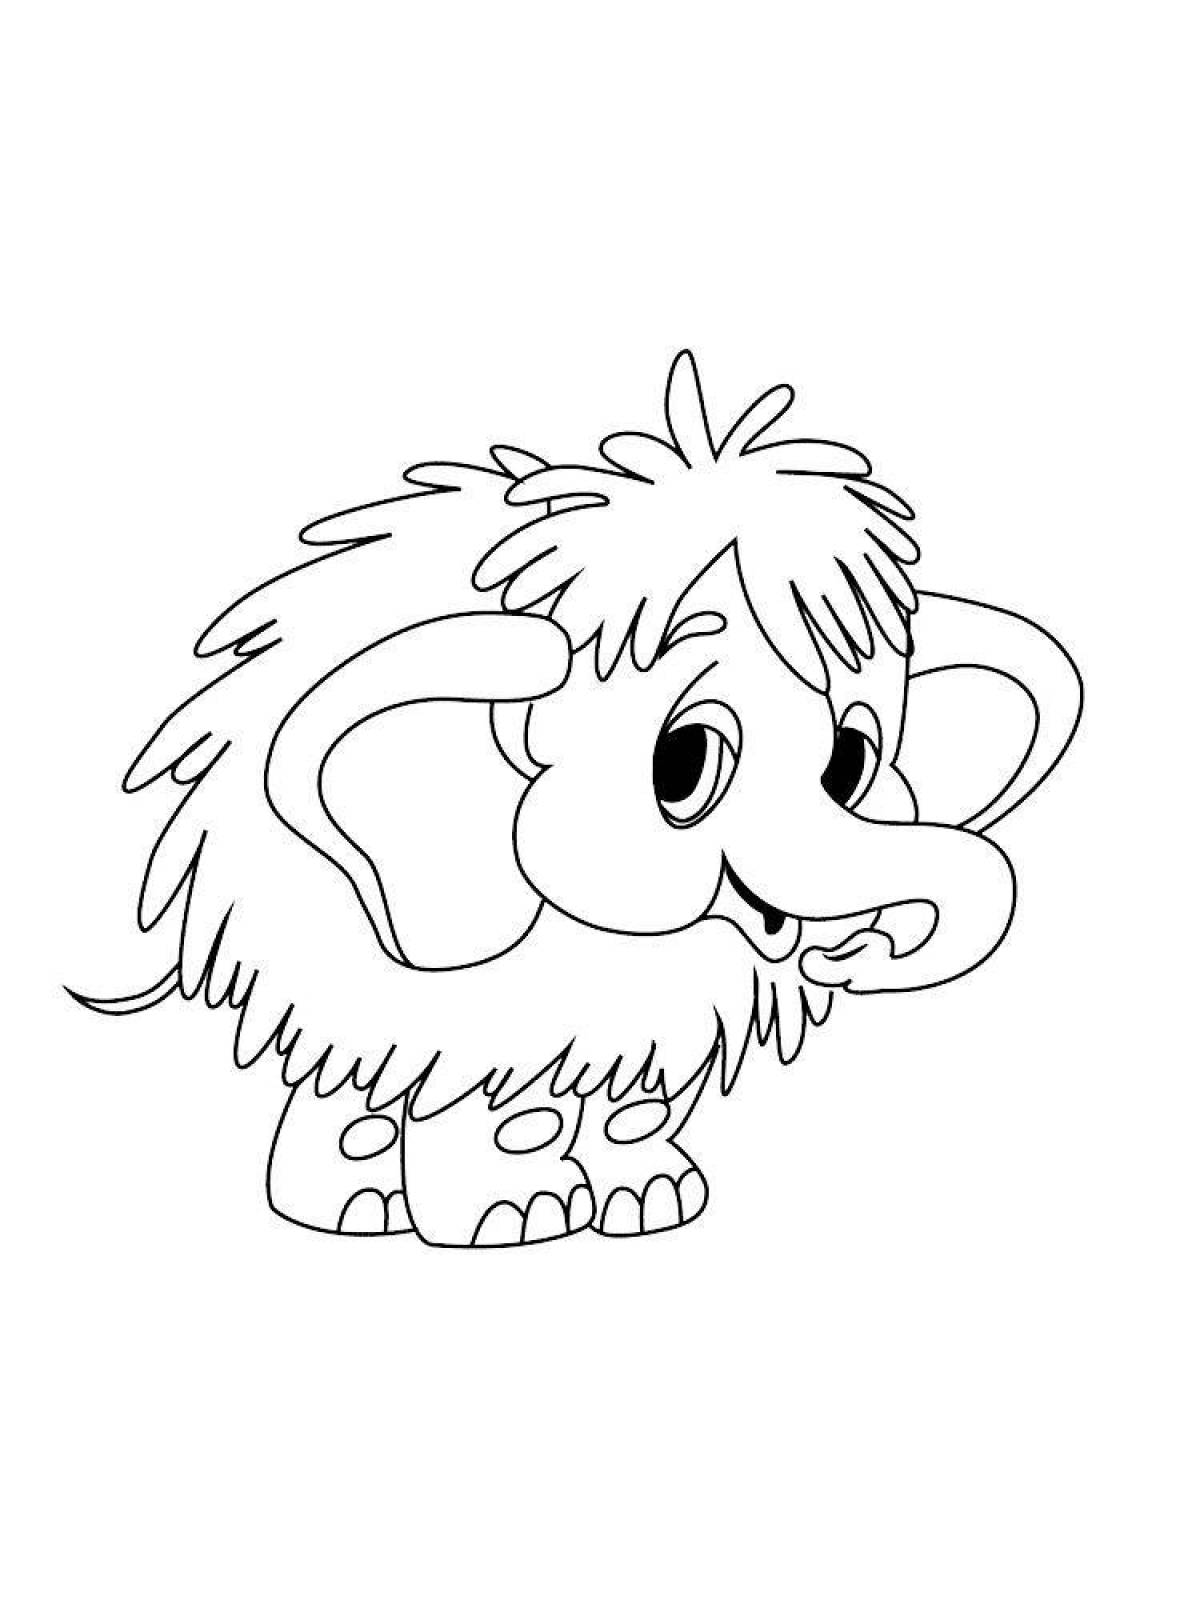 Coloring page dazzling mammoth